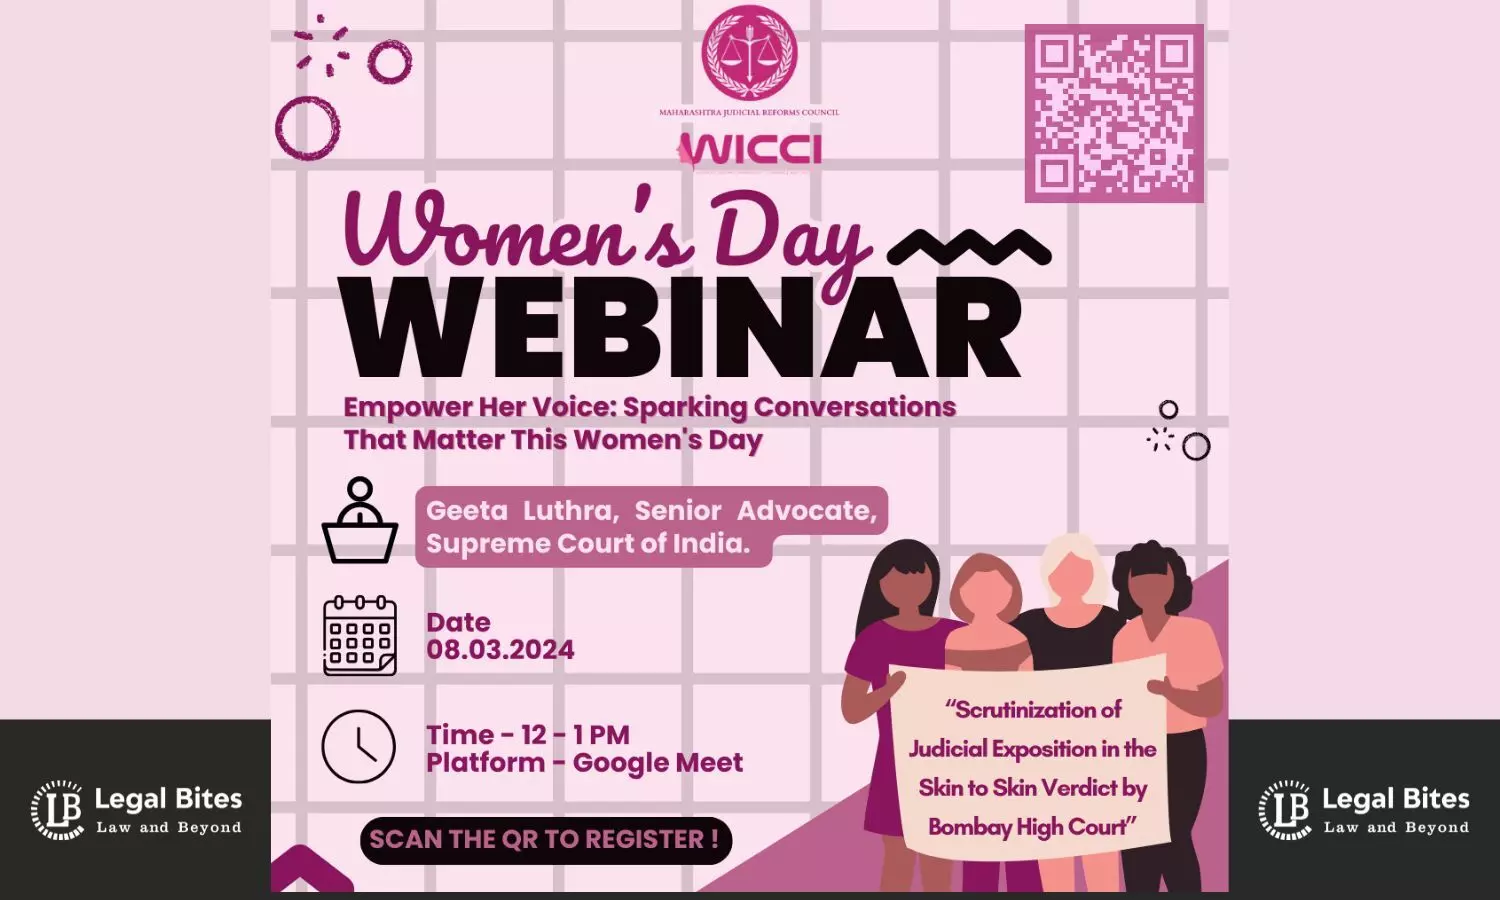 Womens Day Webinar: Scrutinization of Judicial Exposition in the Skin-to-Skin Verdict by Bombay High Court | National Judicial Reforms Council, WICCI